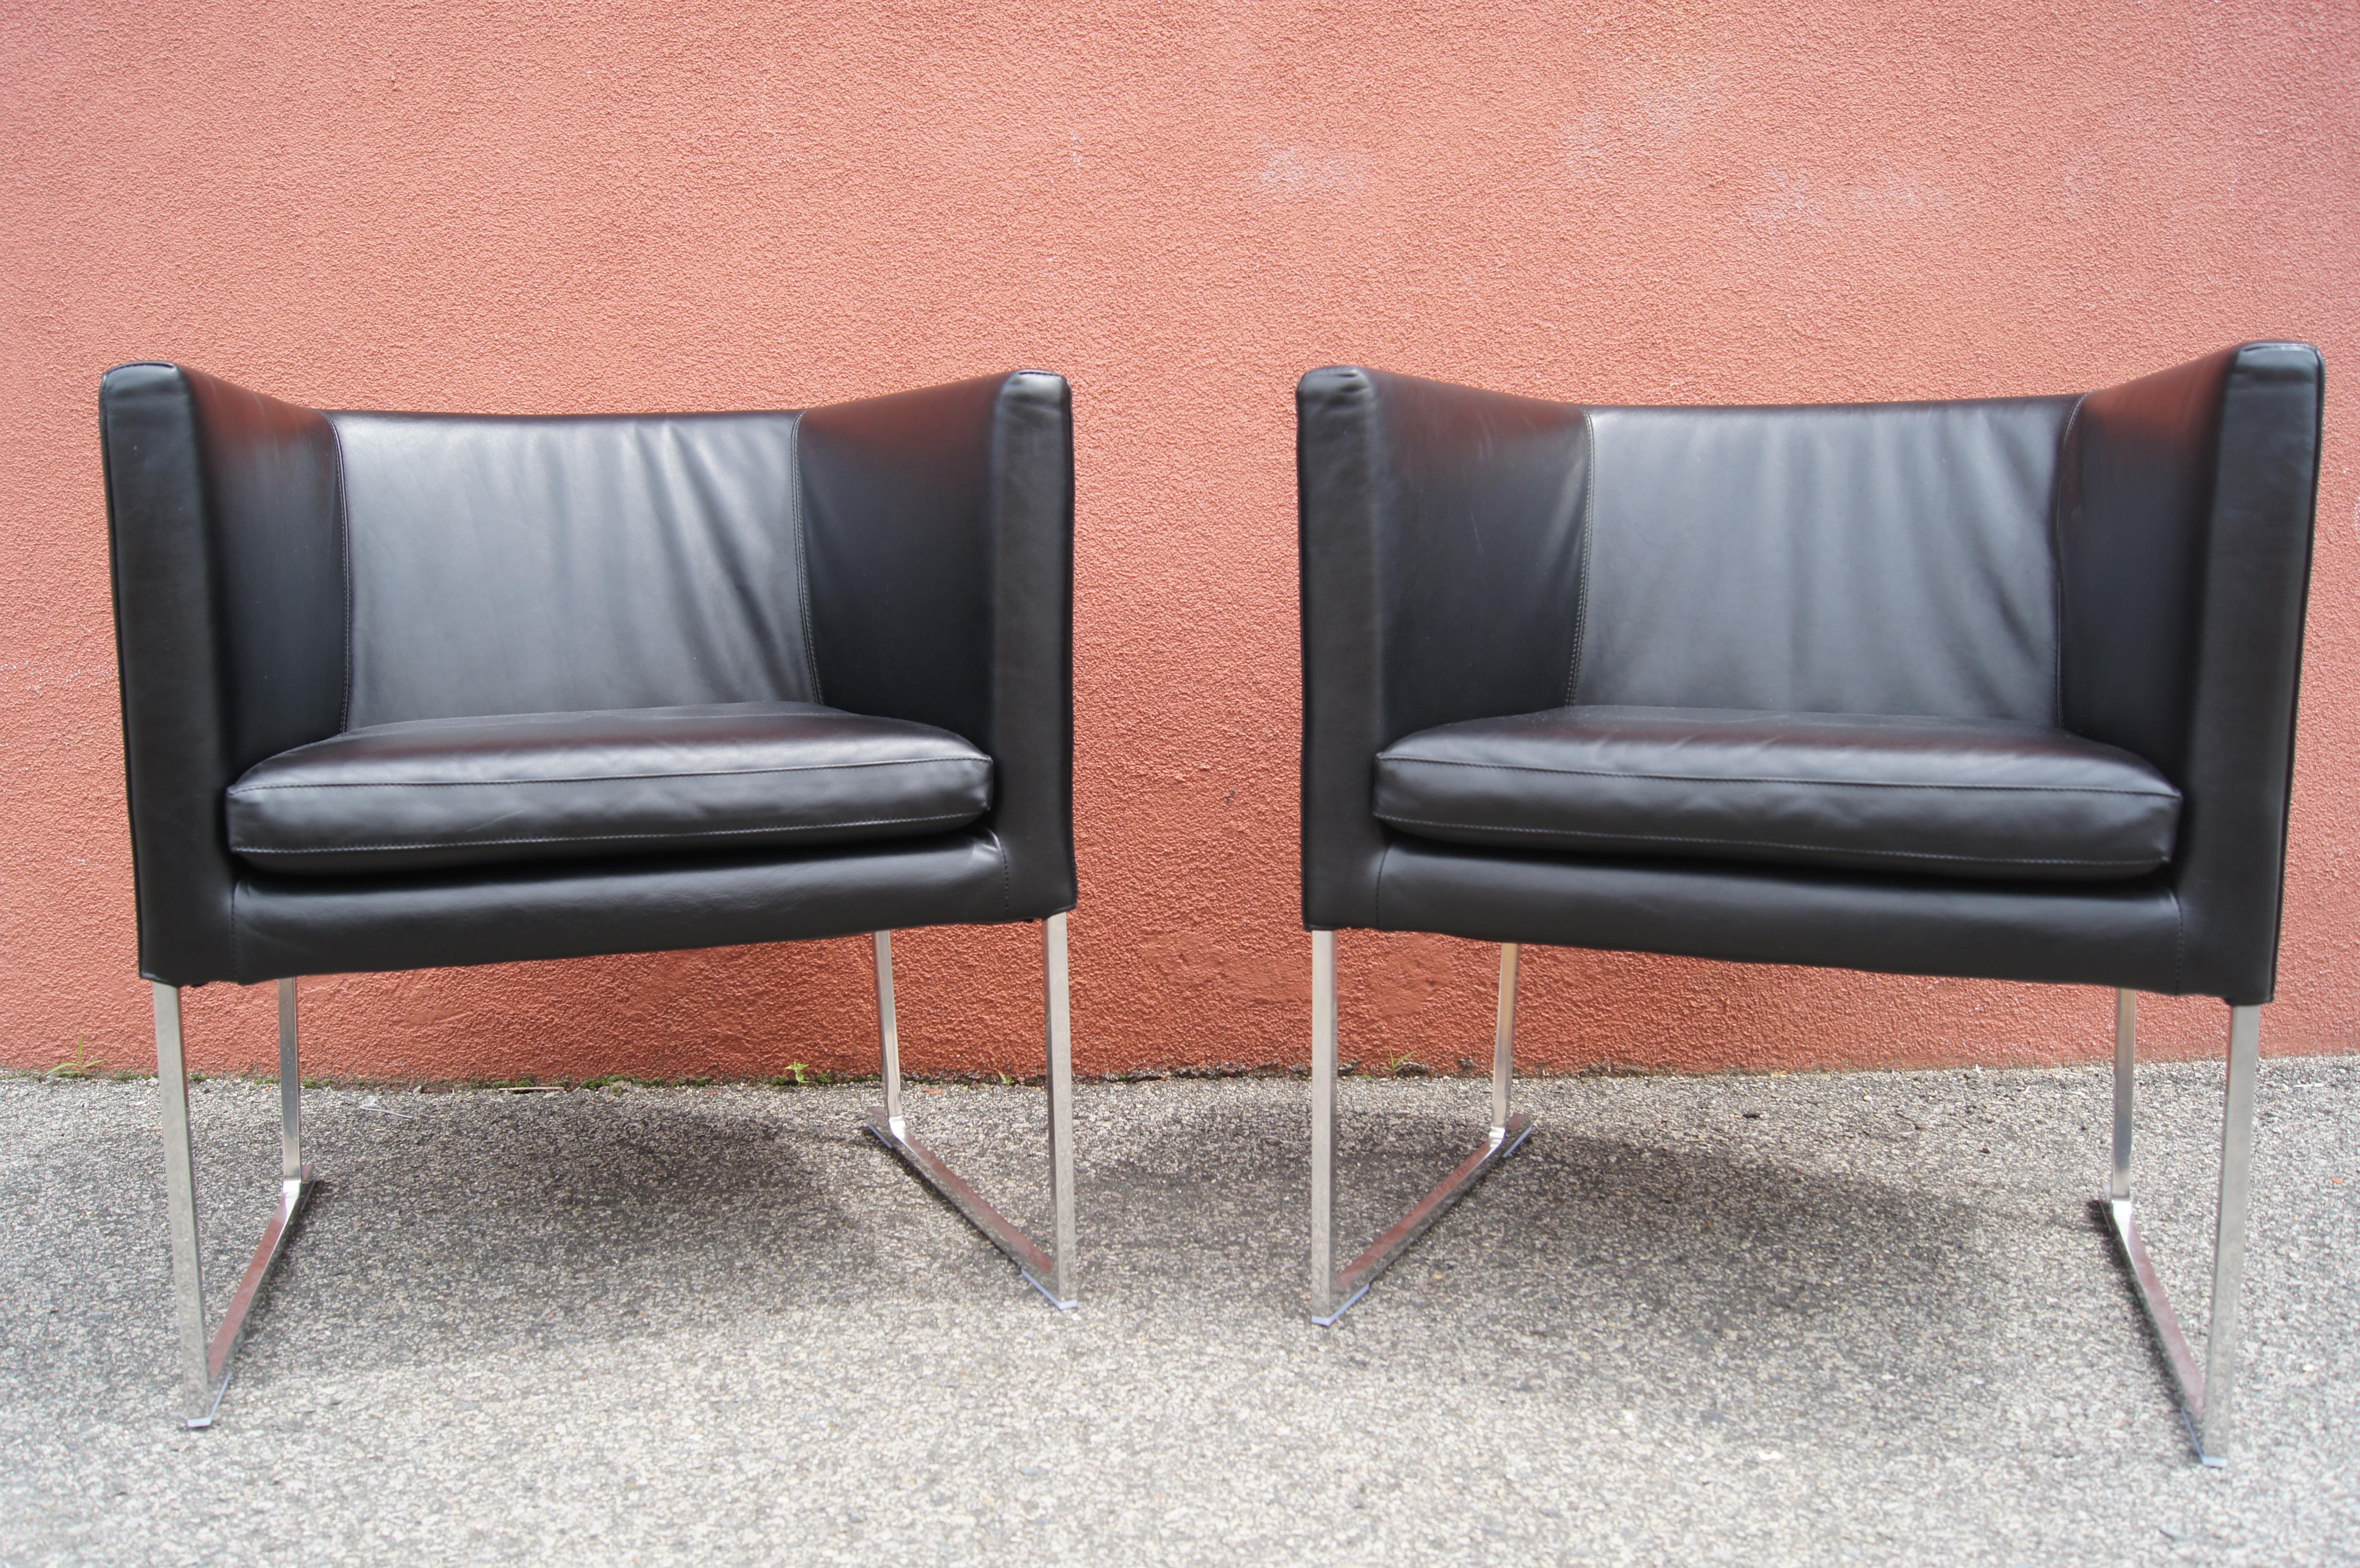 Designed by Antonio Citterio for B&B Italia/Maxalto, the Solo armchair features a lightweight die-cast aluminum frame with an inclined back. The commodious seat creates a beautiful contrast with the slender but sturdy chromed legs. This pair is